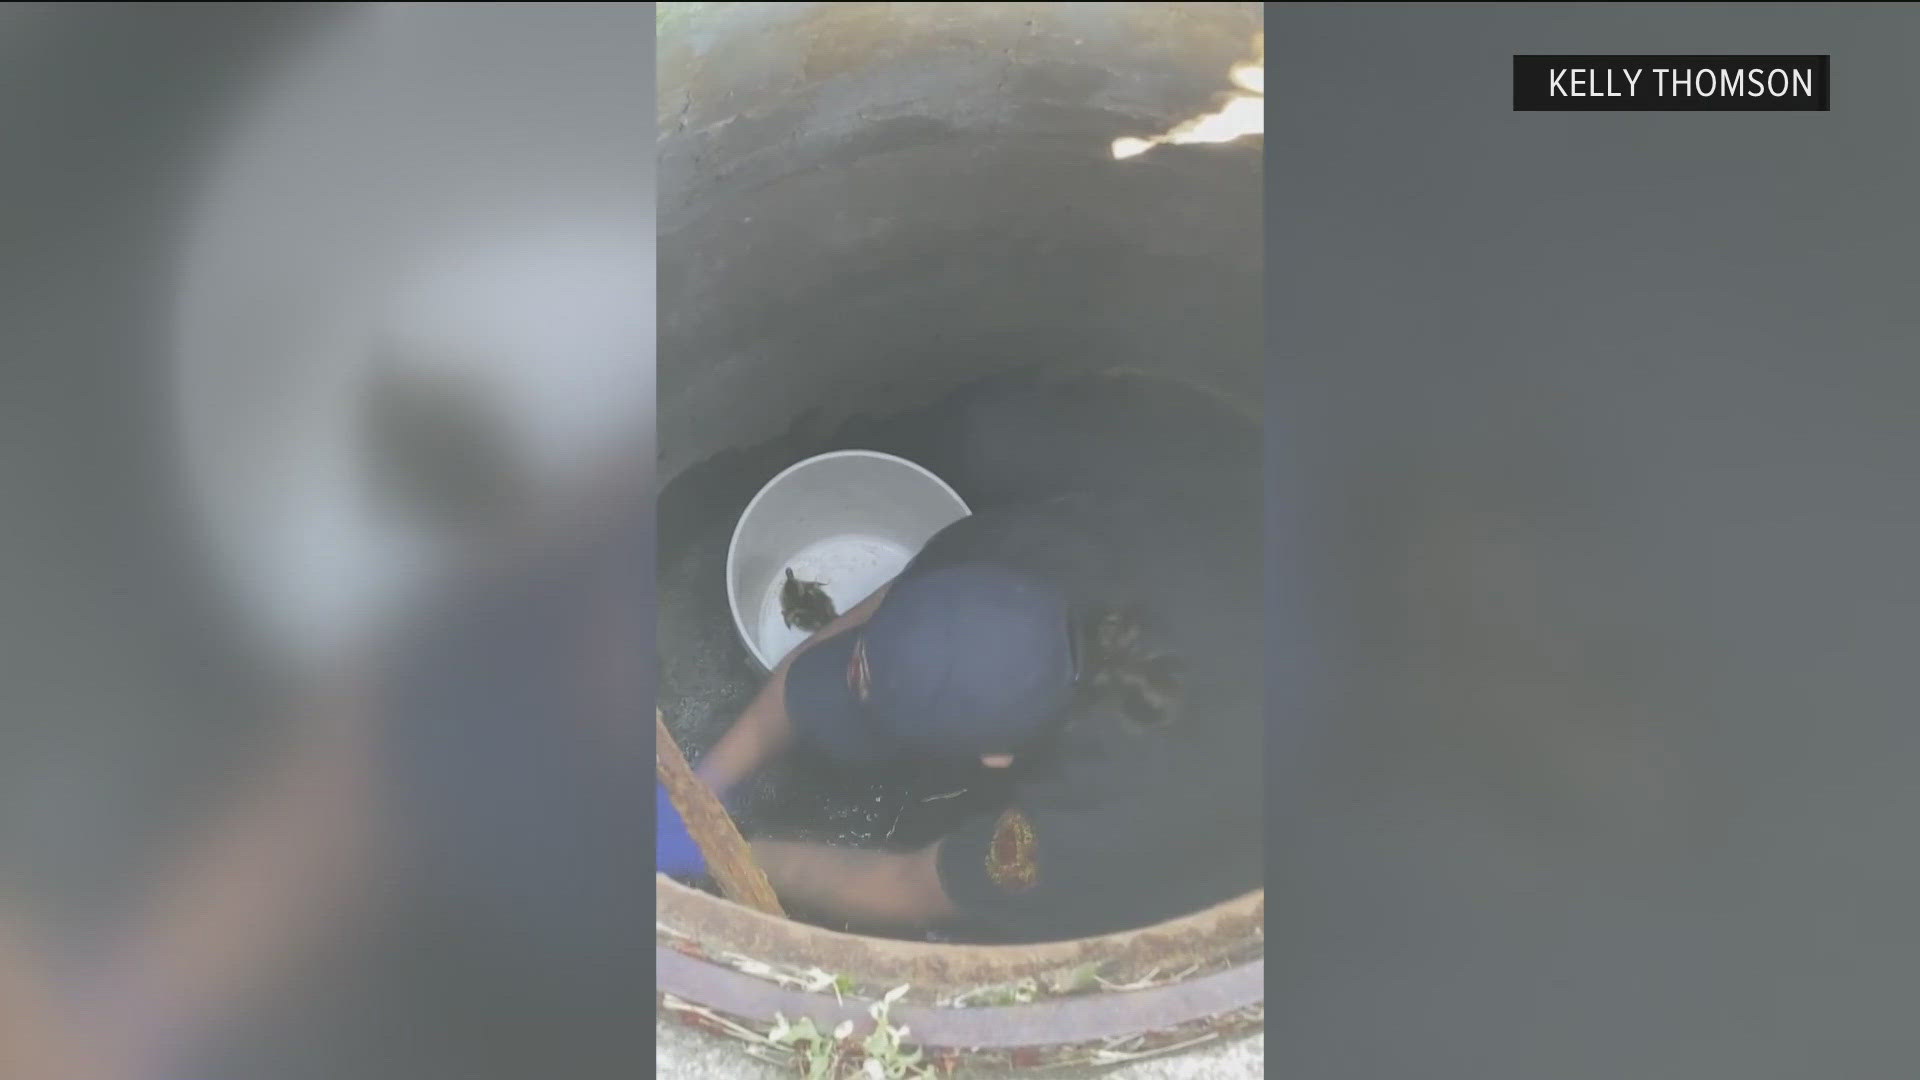 There has been a rash of baby ducks falling into sewers lately. Fortunately, on more than one occasion, first responders have been able to save the day.